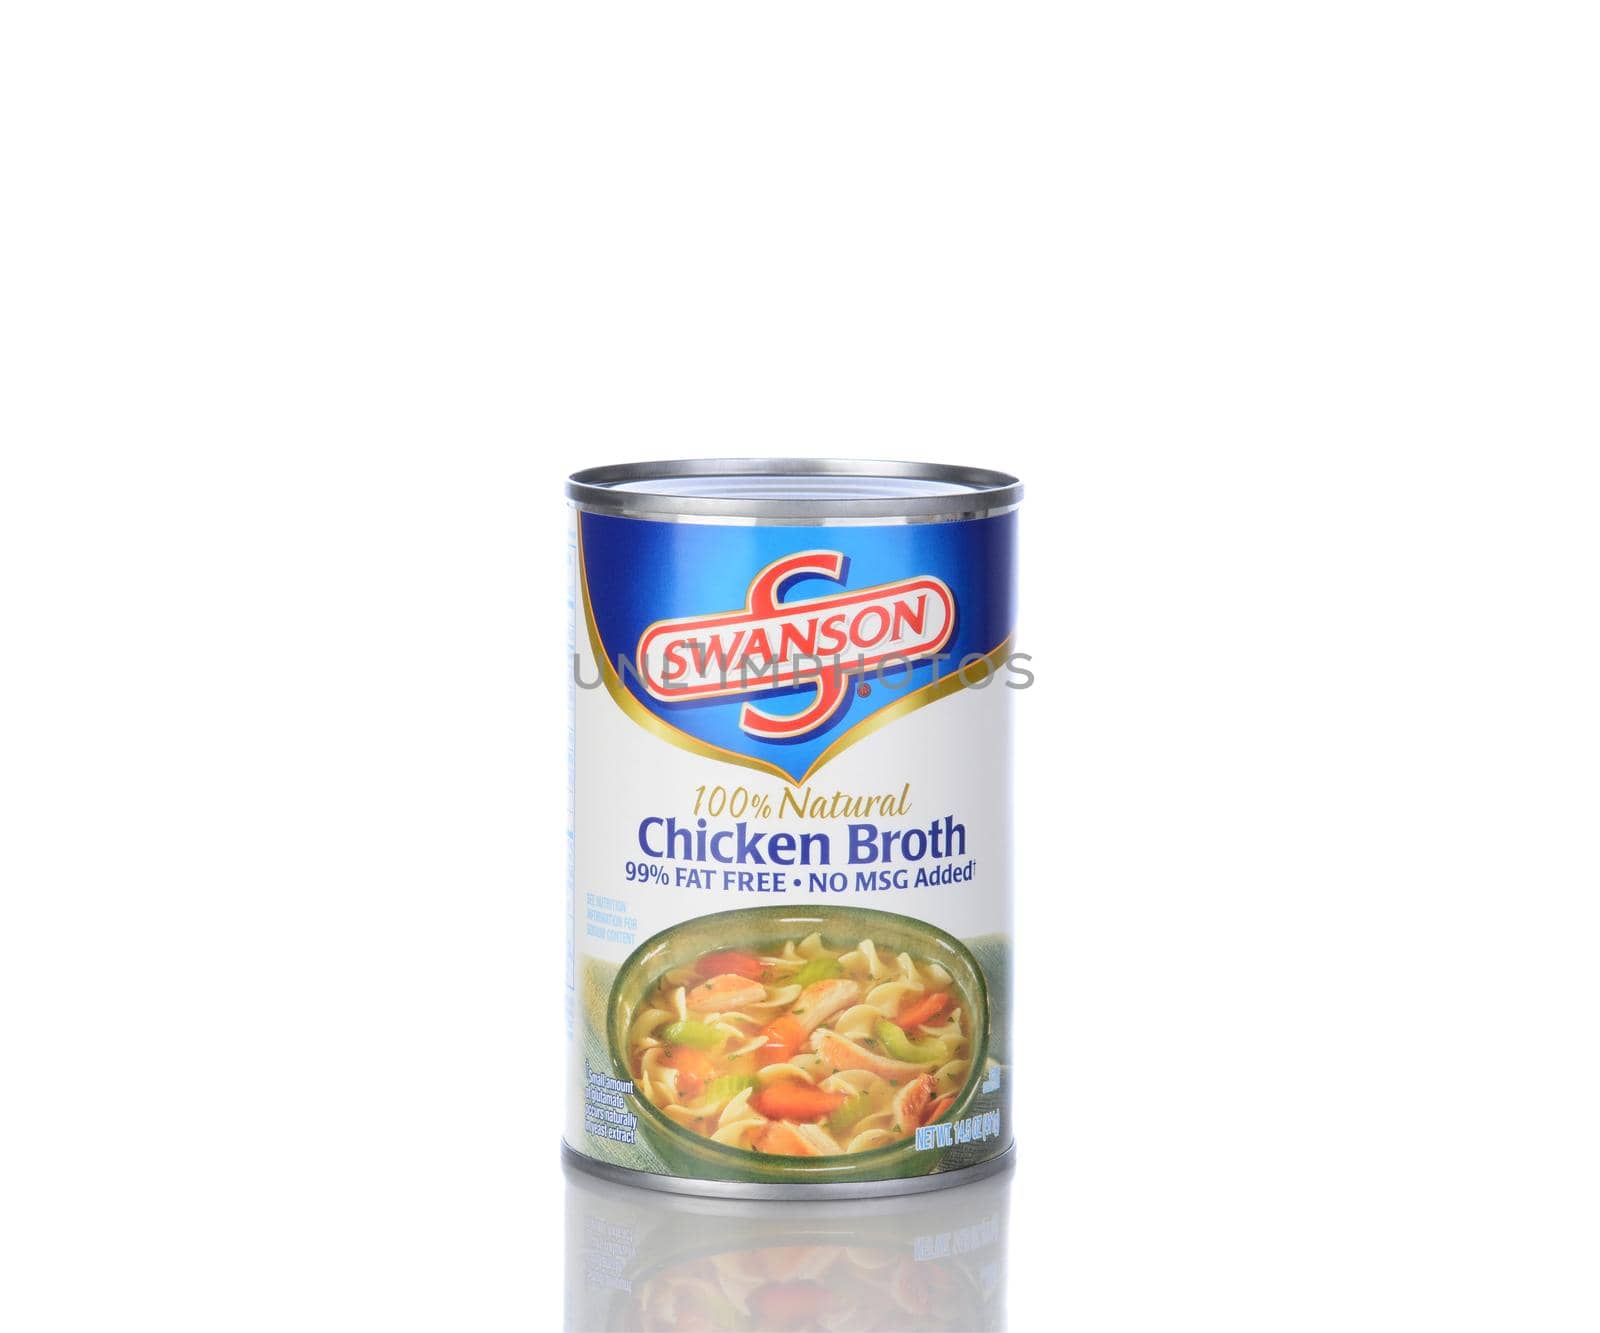 IRVINE, CA - January 05, 2014: A can of Swanson Chicken Broth. Introuduced in the early 1900's the Swanson brand is currently owned by the Campbell Soup Conpany.